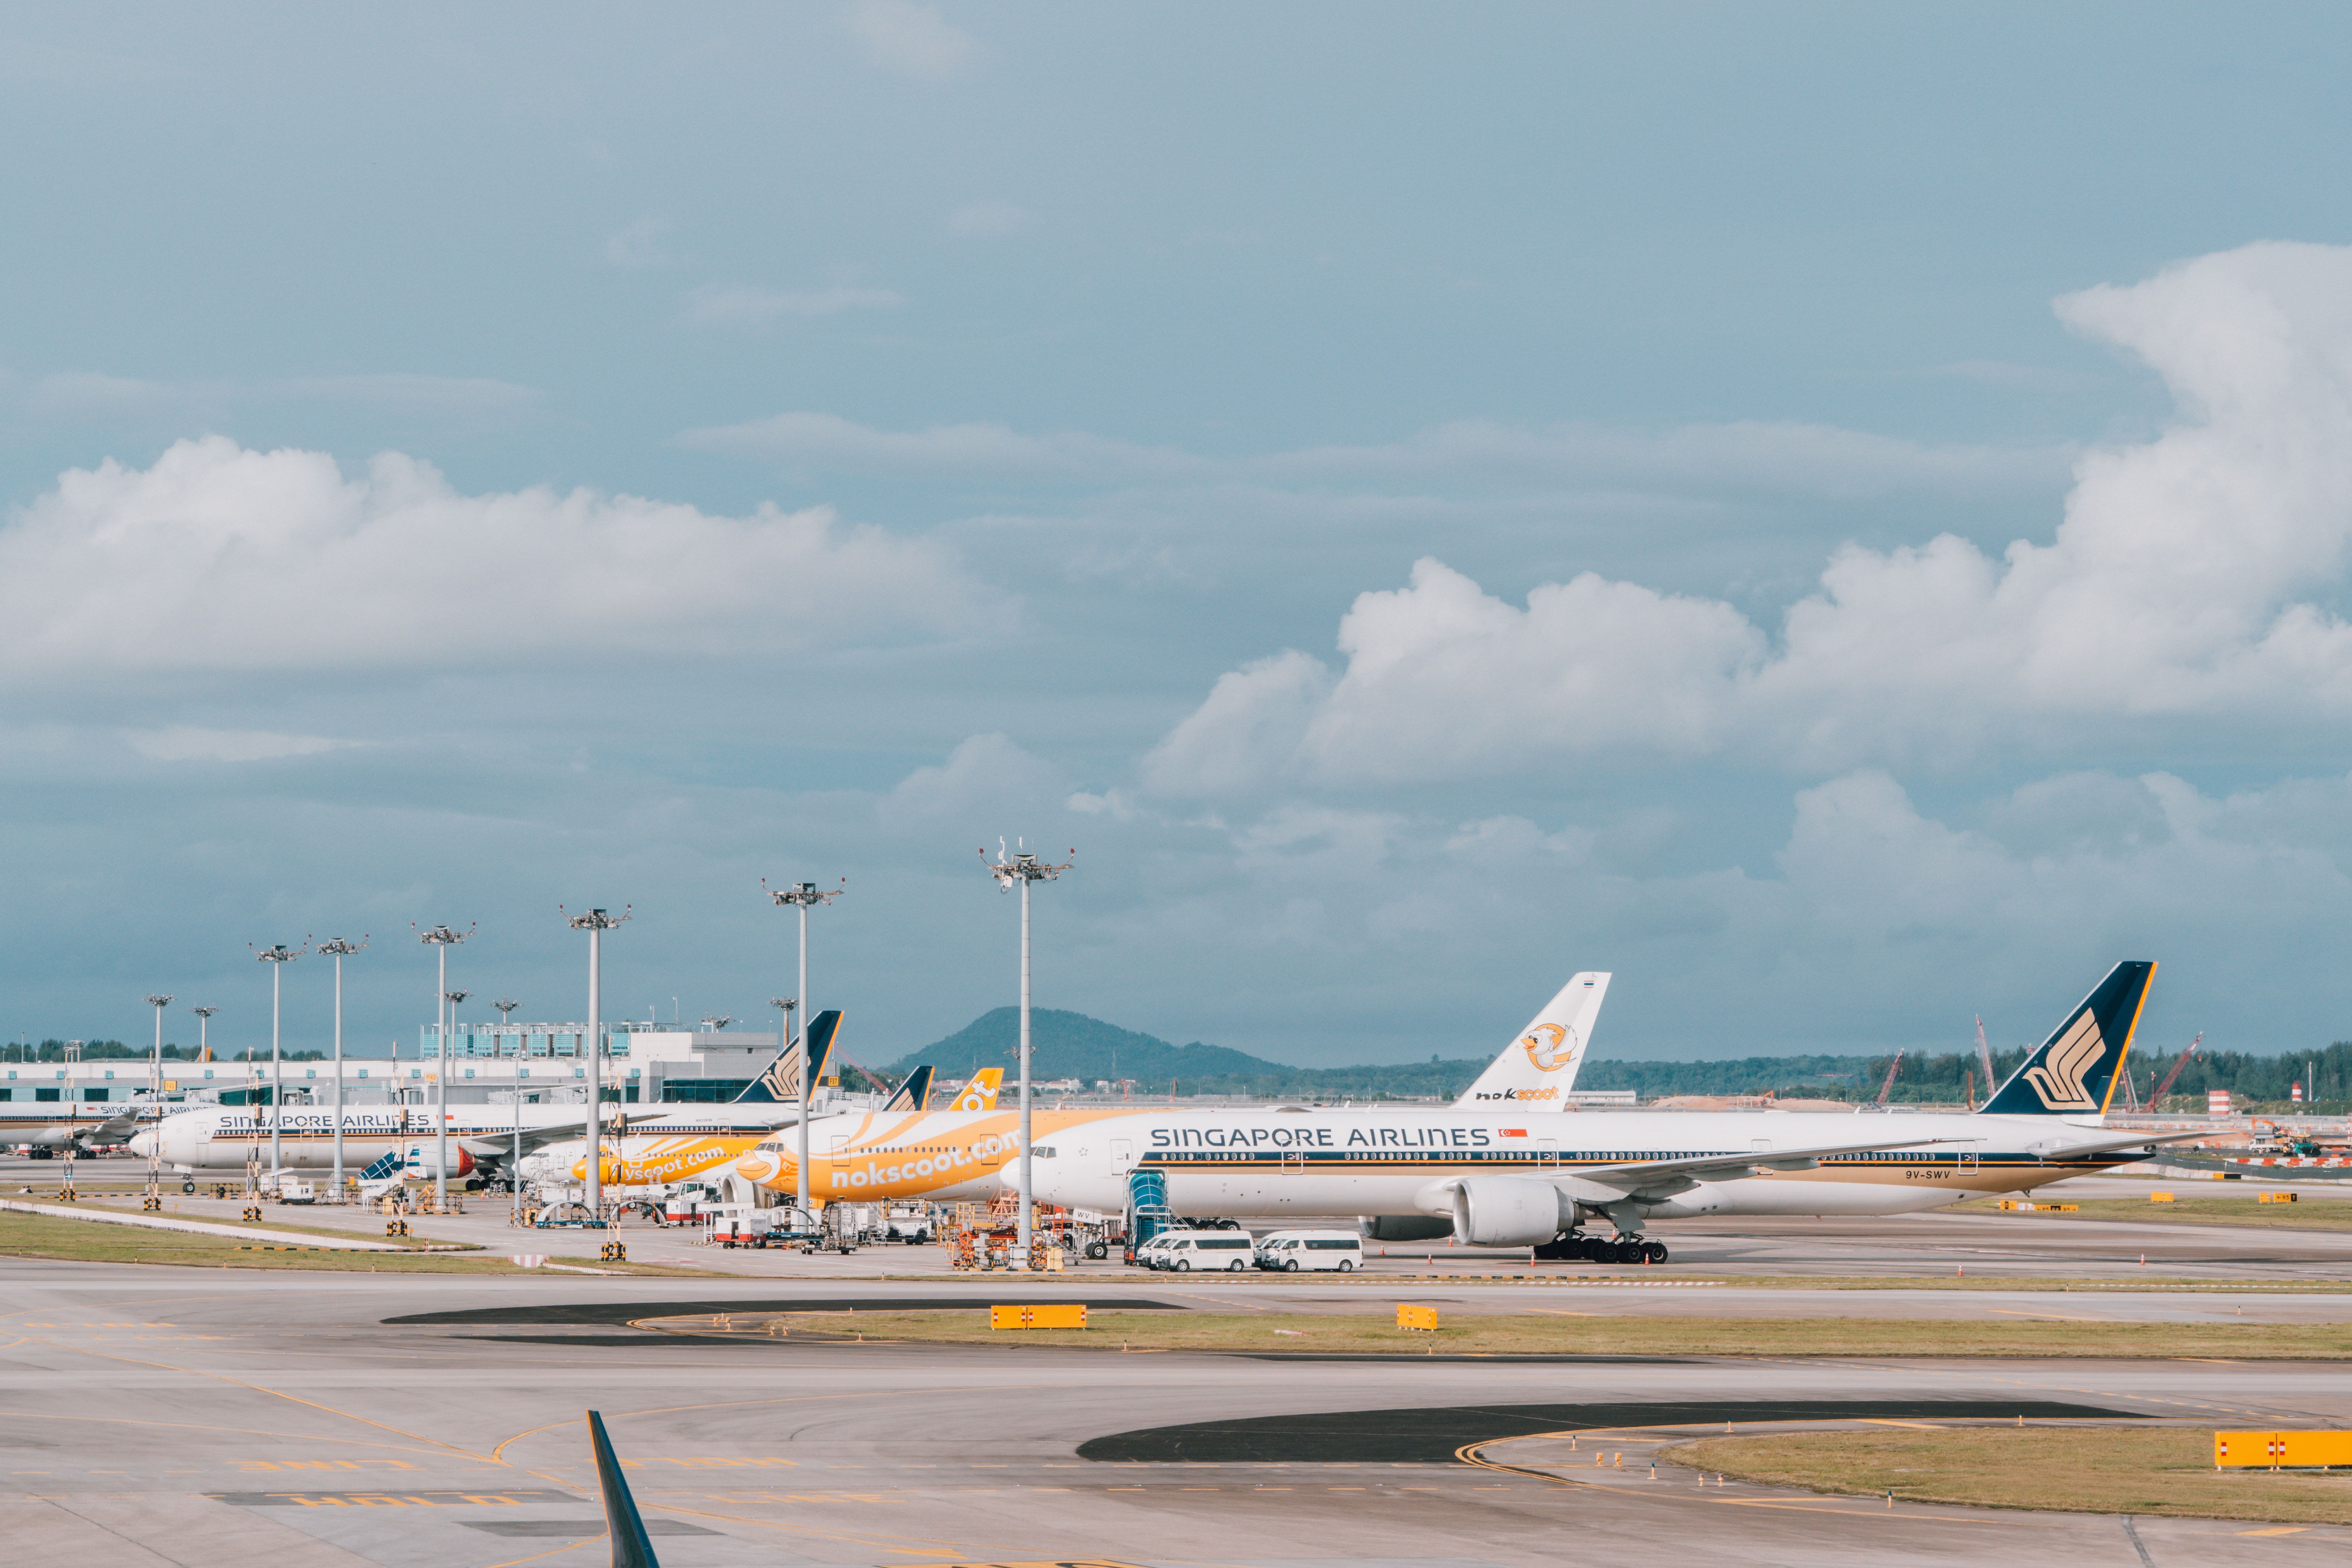 Planes parked at Singapore Changi Airport